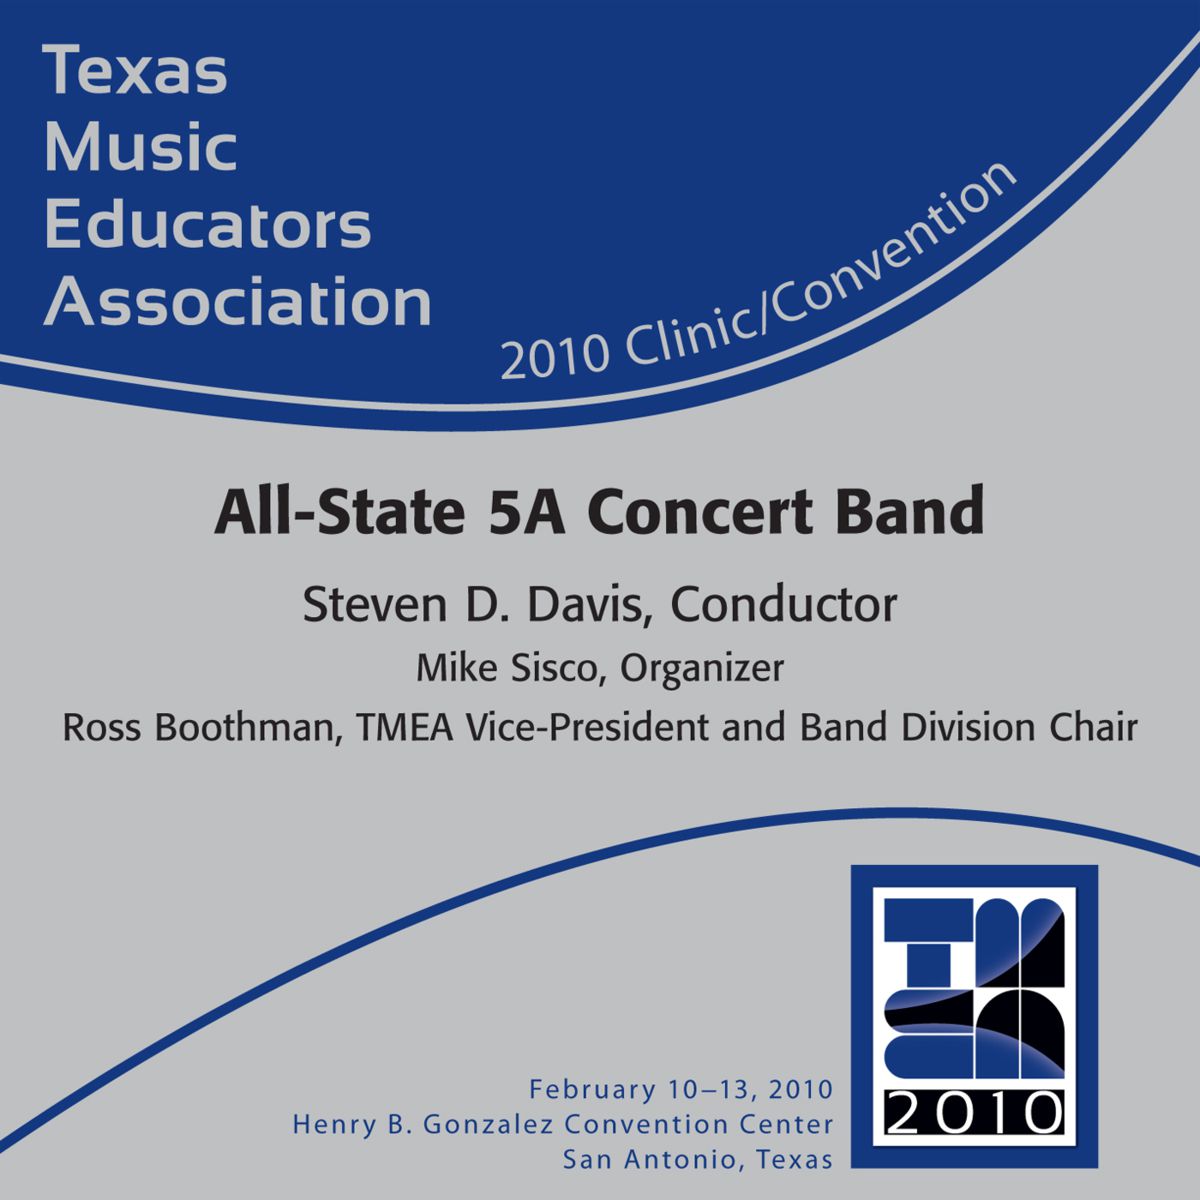 2010 Texas Music Educators Association: All-State 5A Concert Band - click here